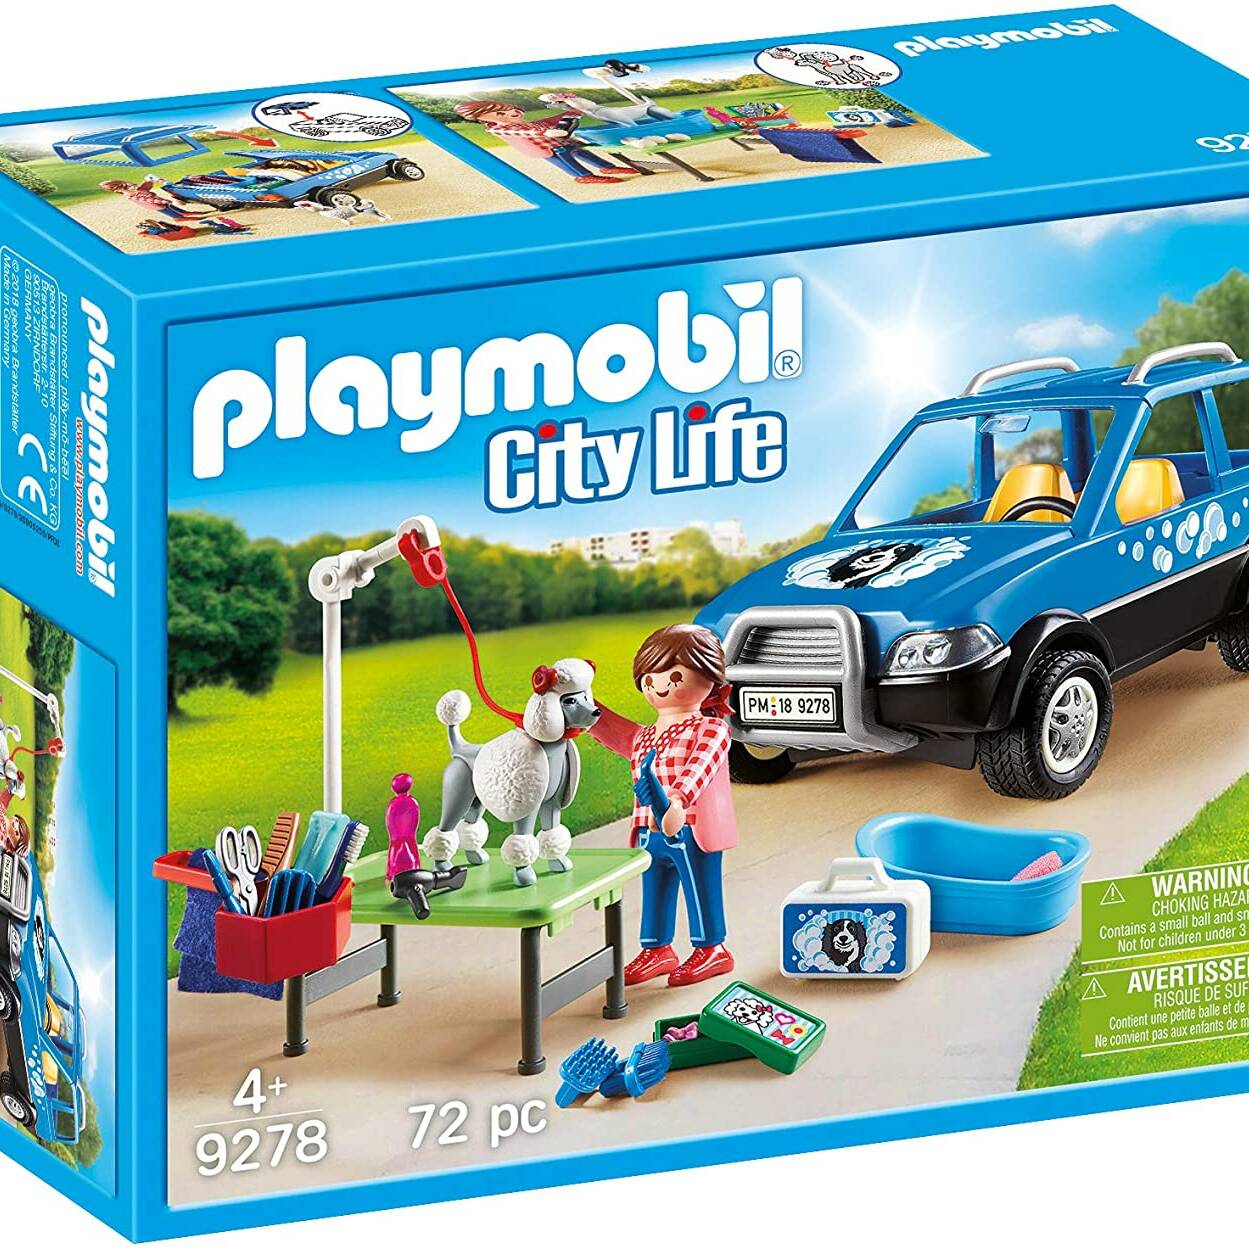 PLAYMOBIL 9278 CITY LIFE MOBILE PET GROOMER WITH REMOVEABLE ROOF